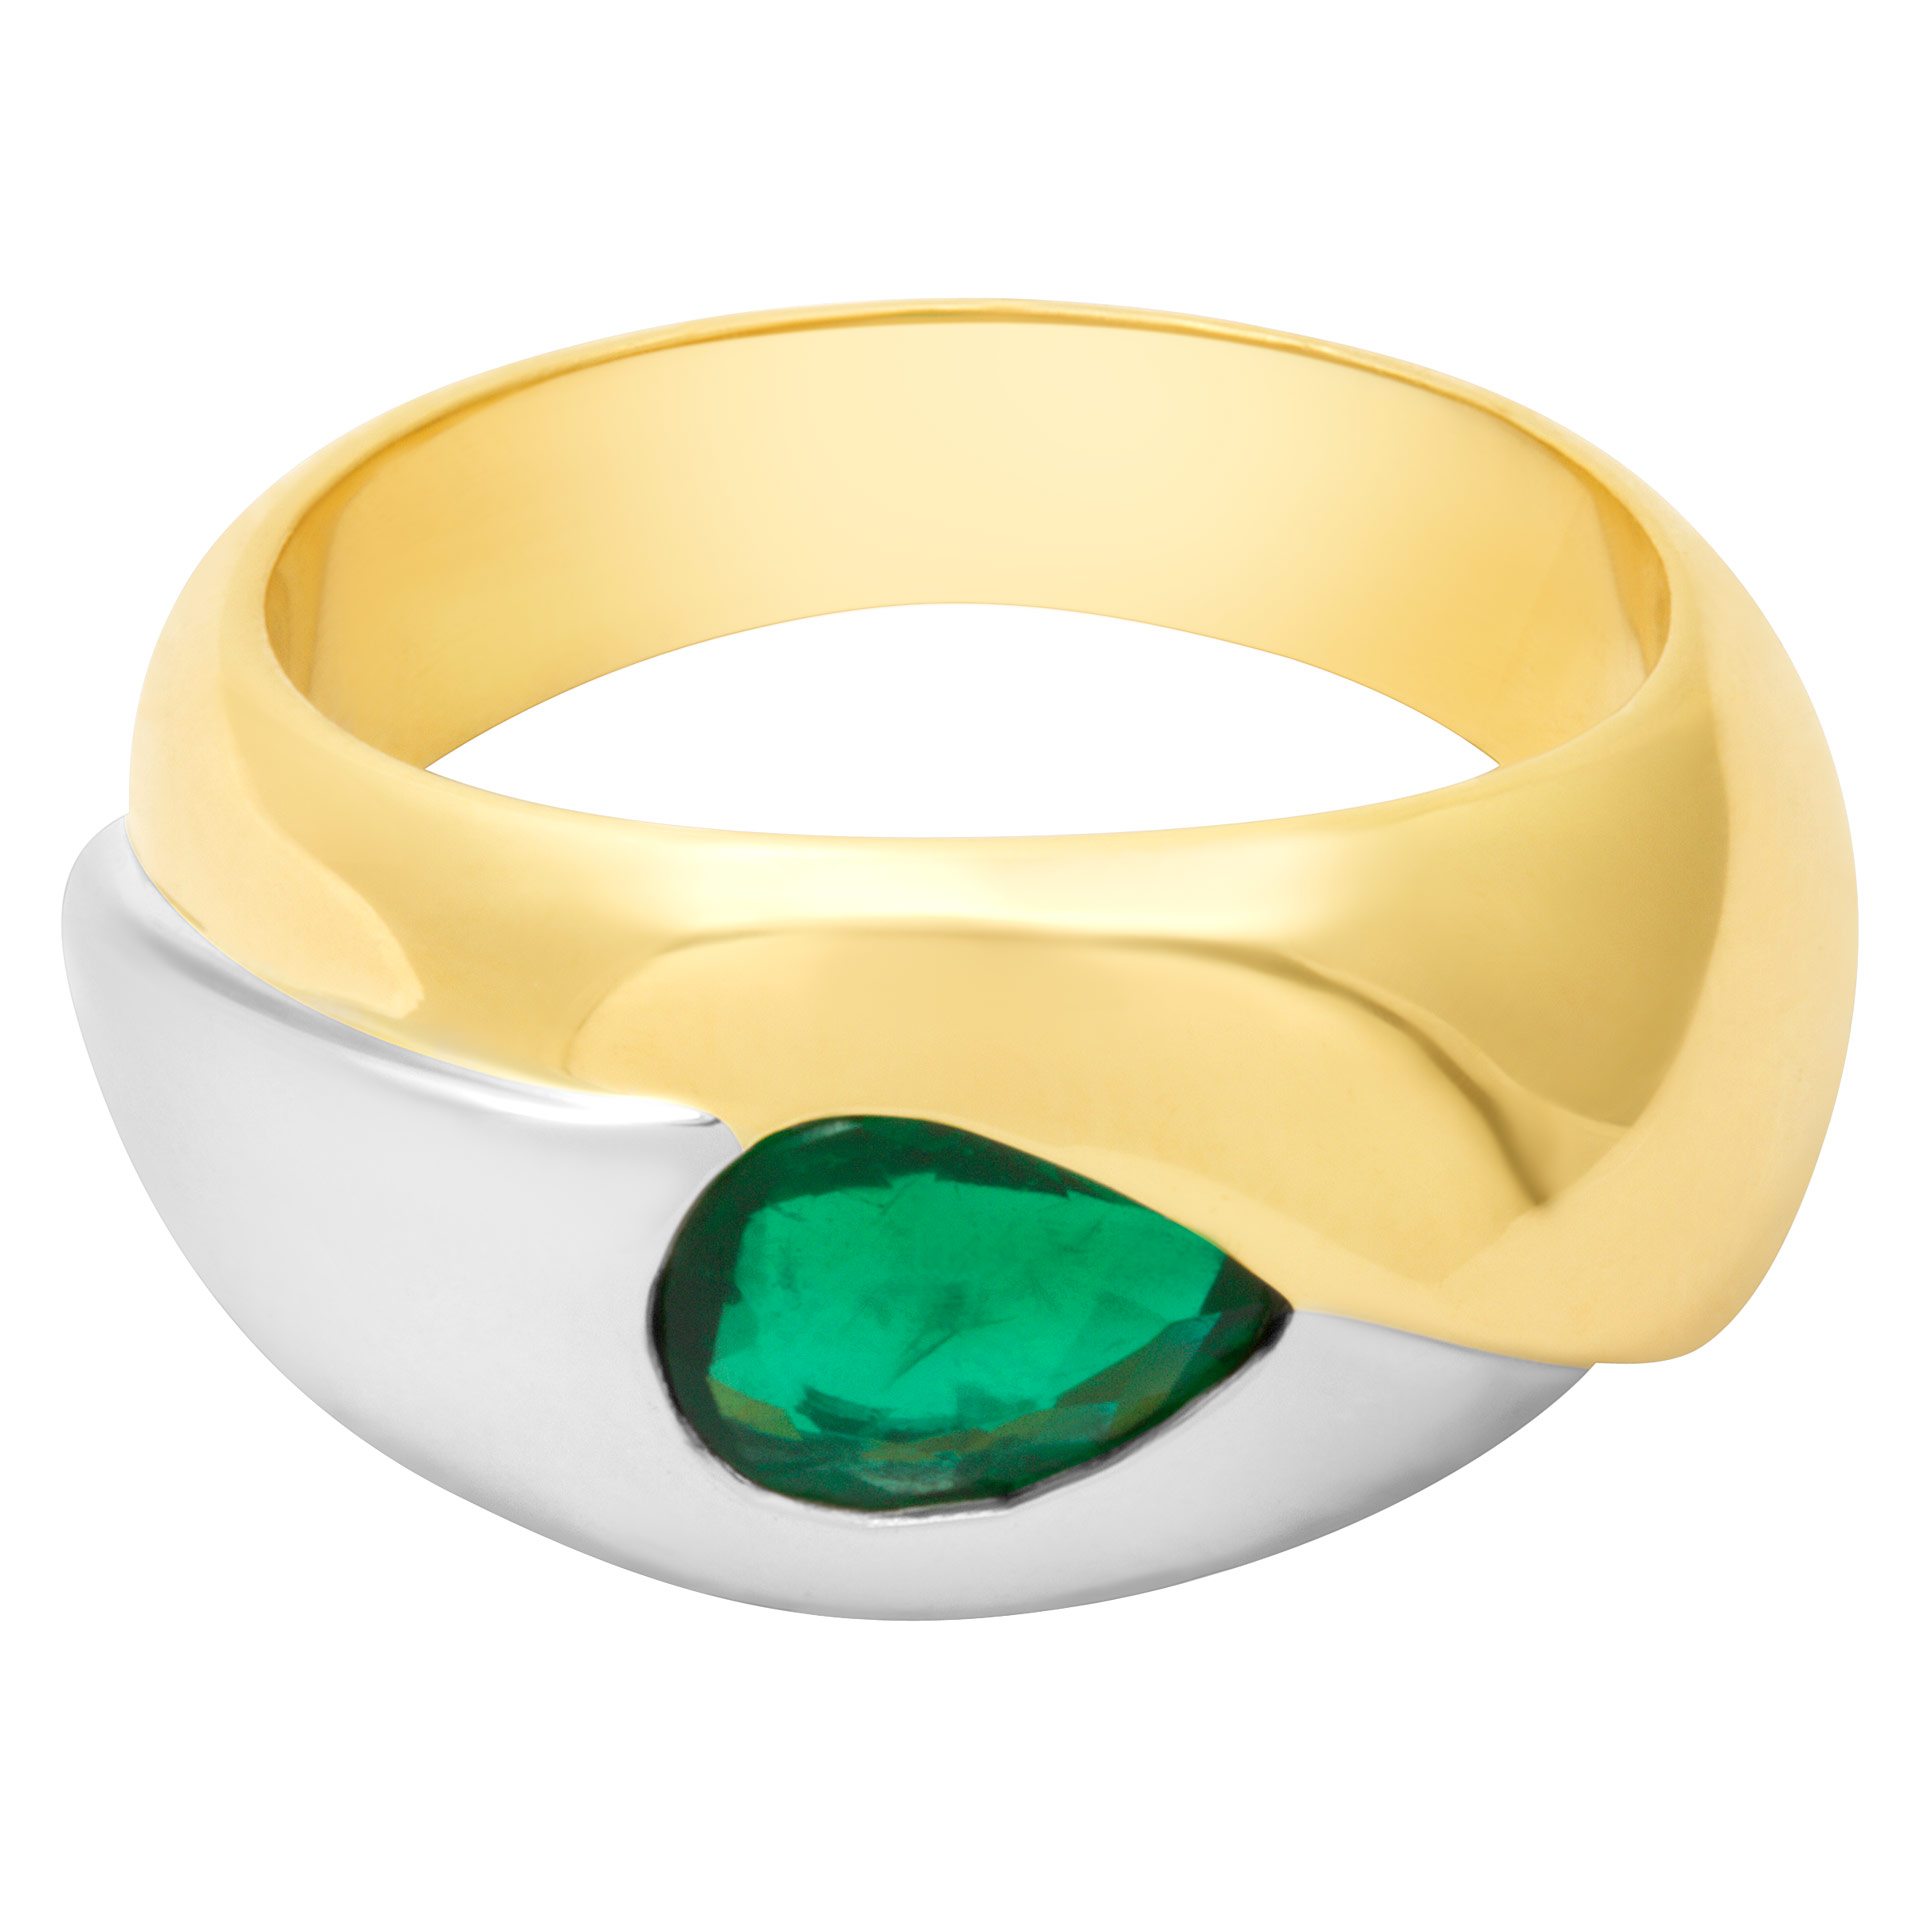 Swirl of 18k yellow and white gold ring featuring a 0.60 cts deep green emerald